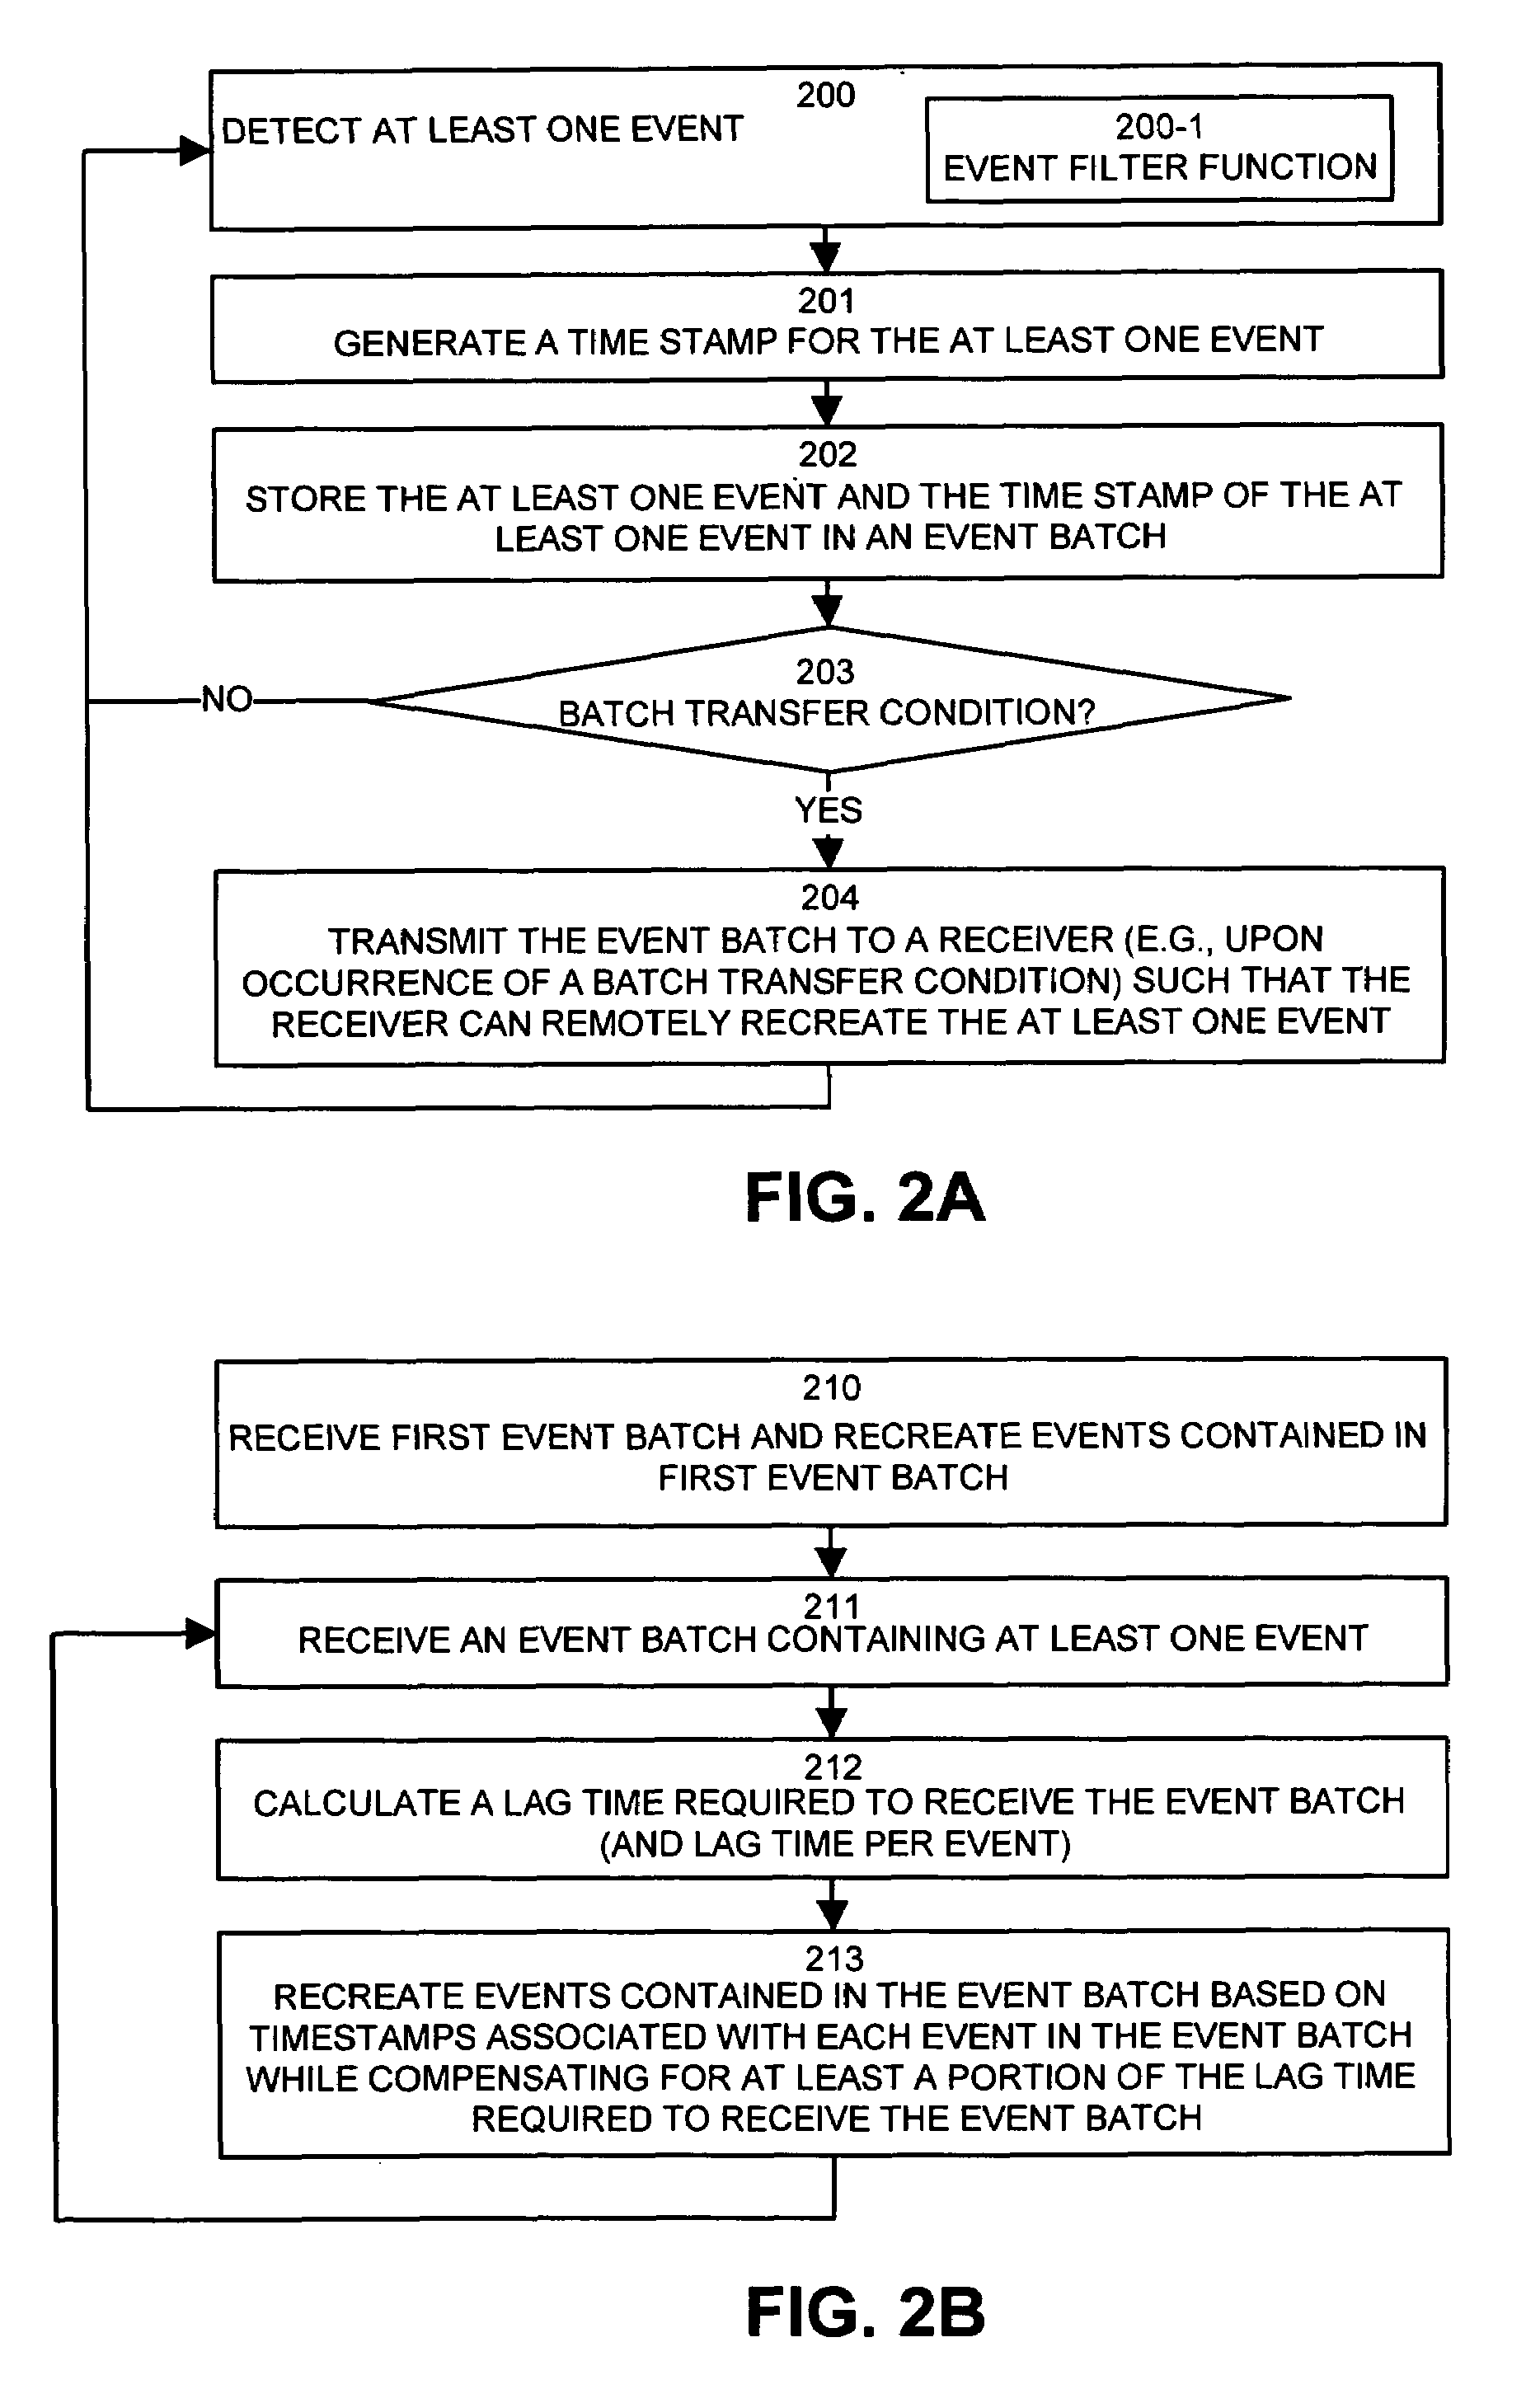 Method and apparatus for exchanging event information between computer systems that reduce perceived lag times by subtracting actual lag times from event playback time